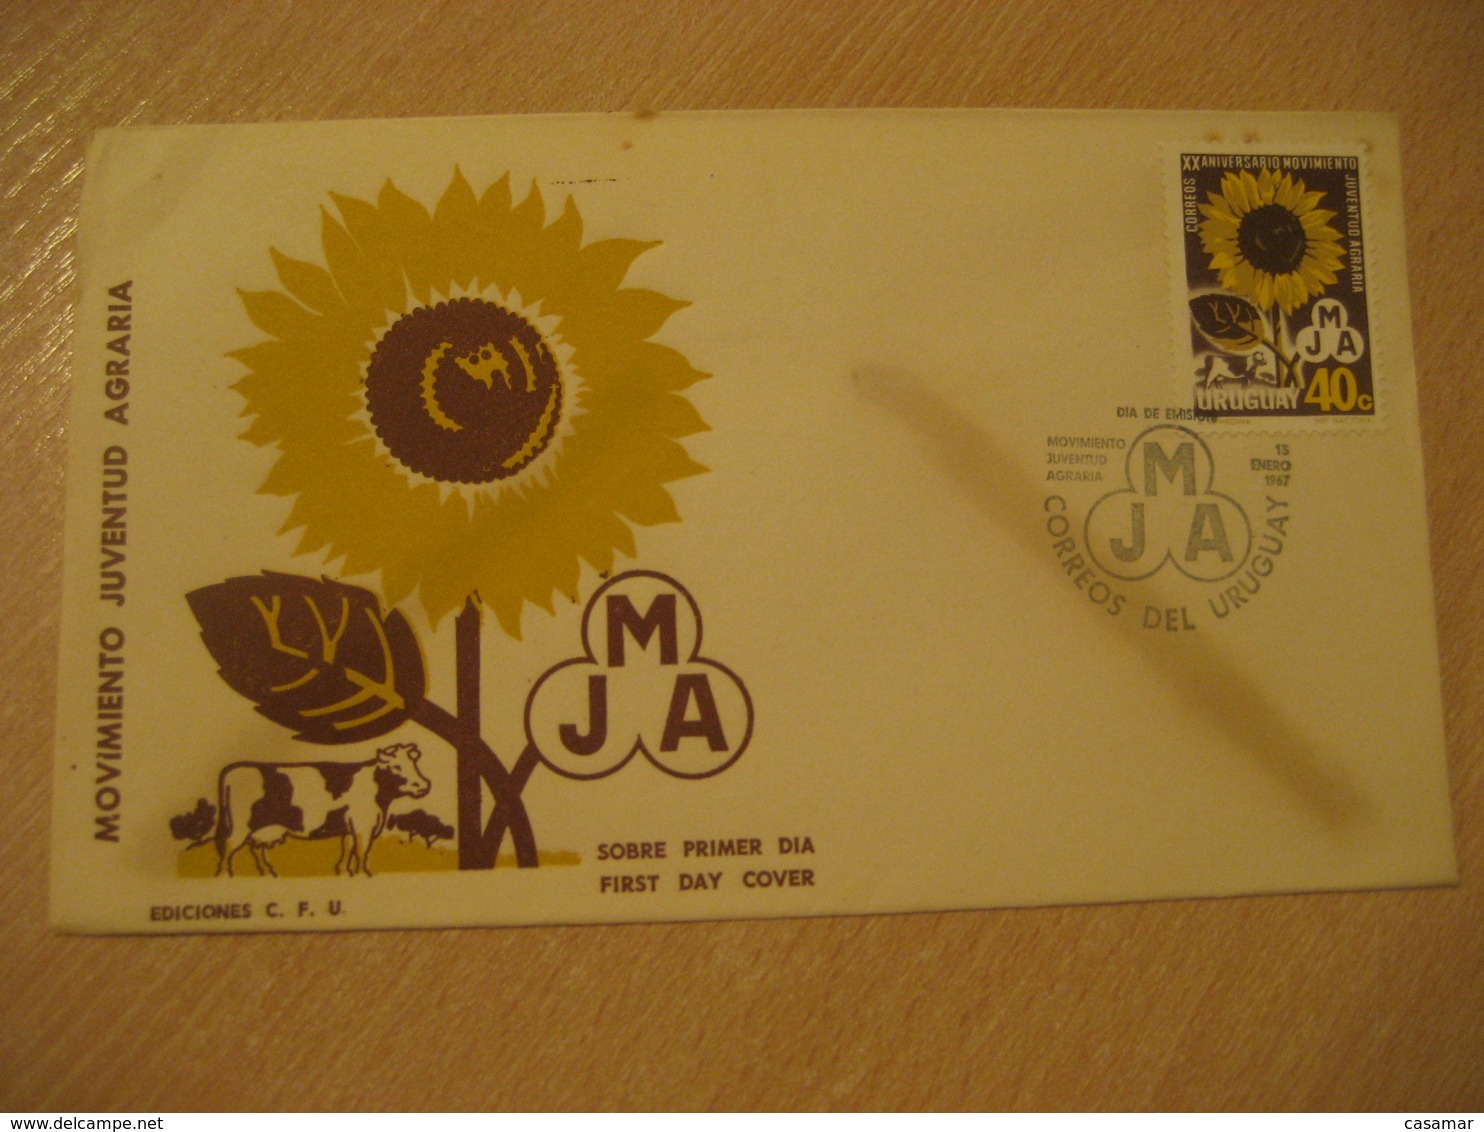 1967 Juventud Agraria Cow FDC Cancel Cover URUGUAY Agriculture - Agriculture